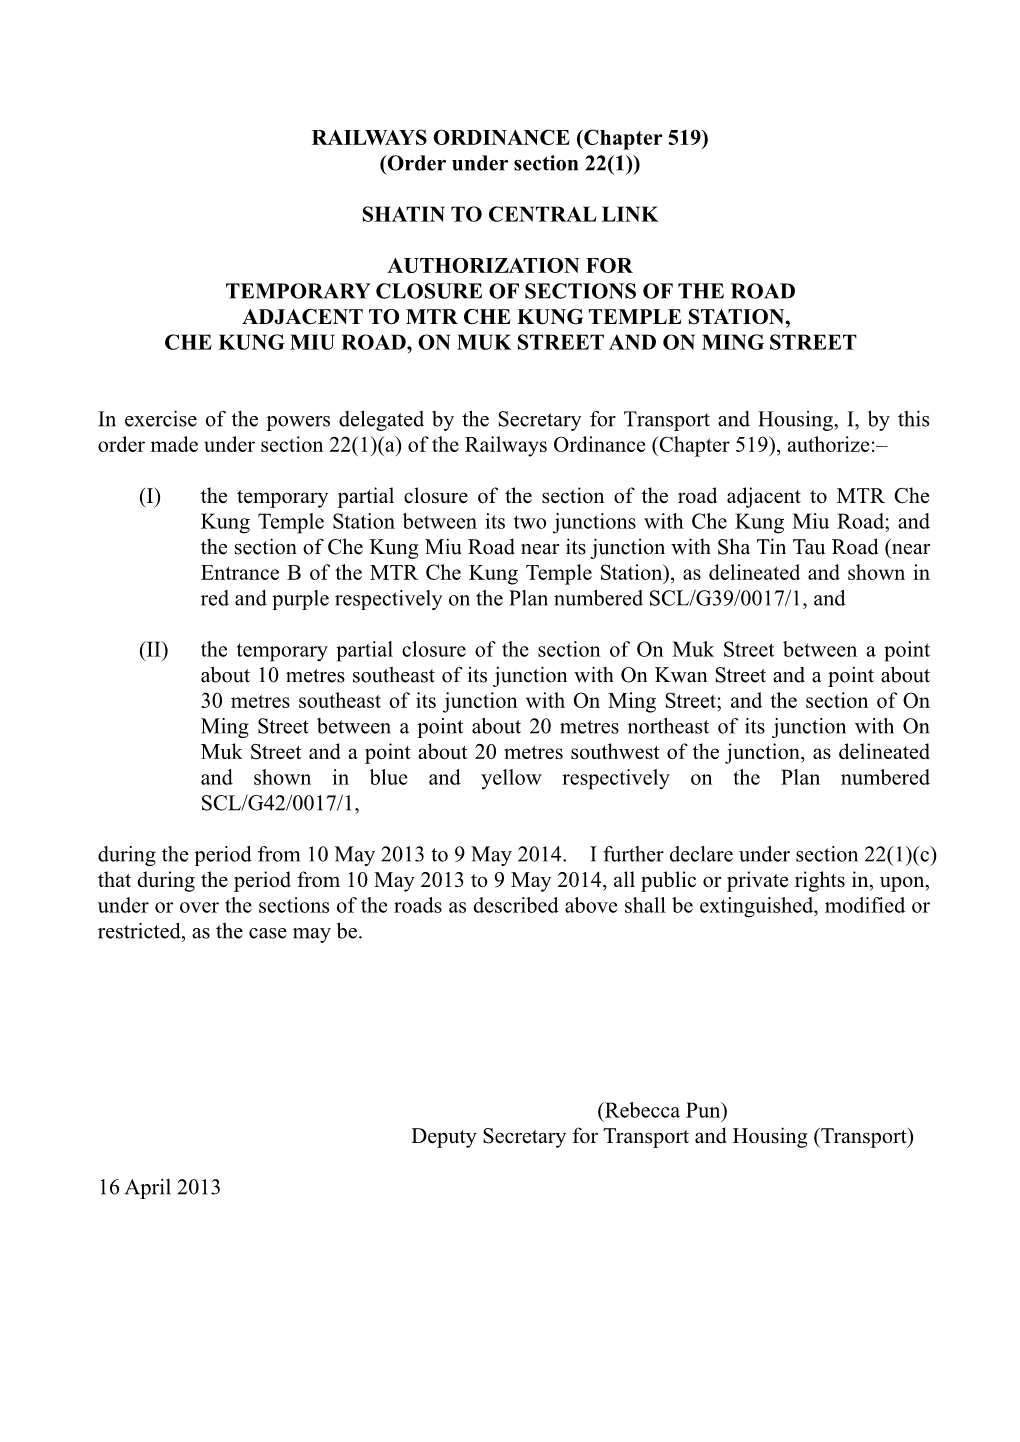 Authorization for Temporary Closure of Sections of the Road Adjacent to Mtr Che Kung Temple Station, Che Kung Miu Road, on Muk Street and on Ming Street